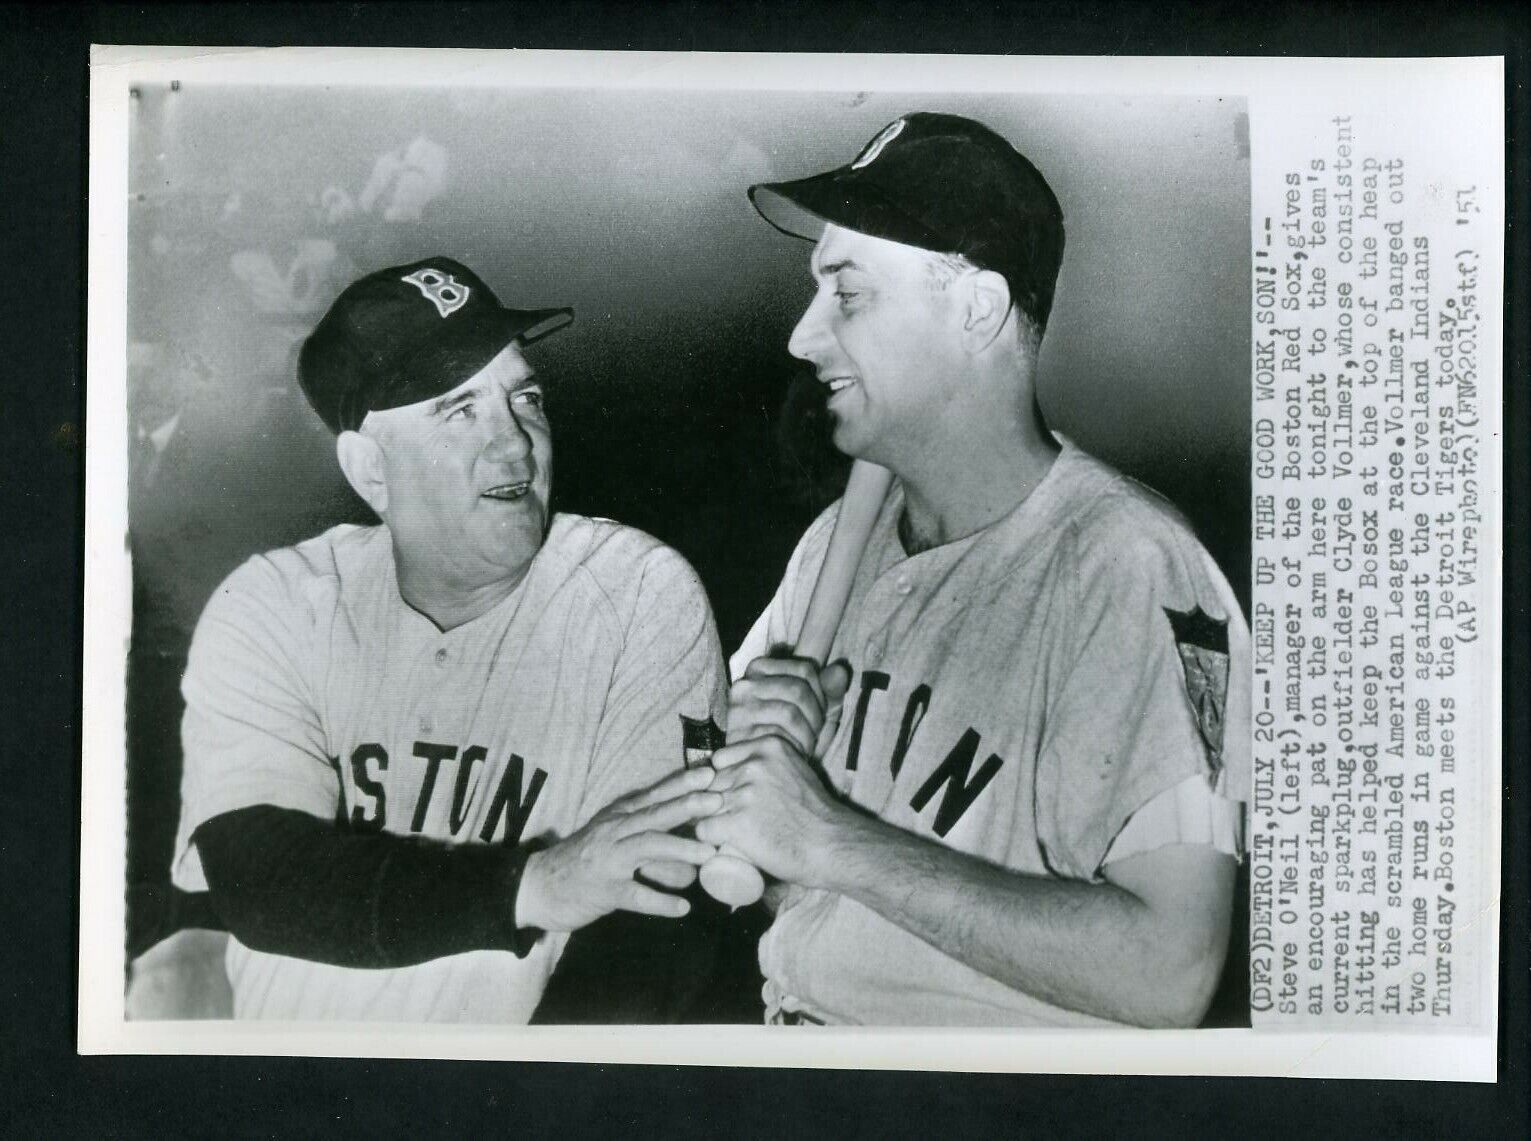 Manager Steve O'Neill & Clyde Vollmer 1951 Press Photo Poster painting Boston Red Sox